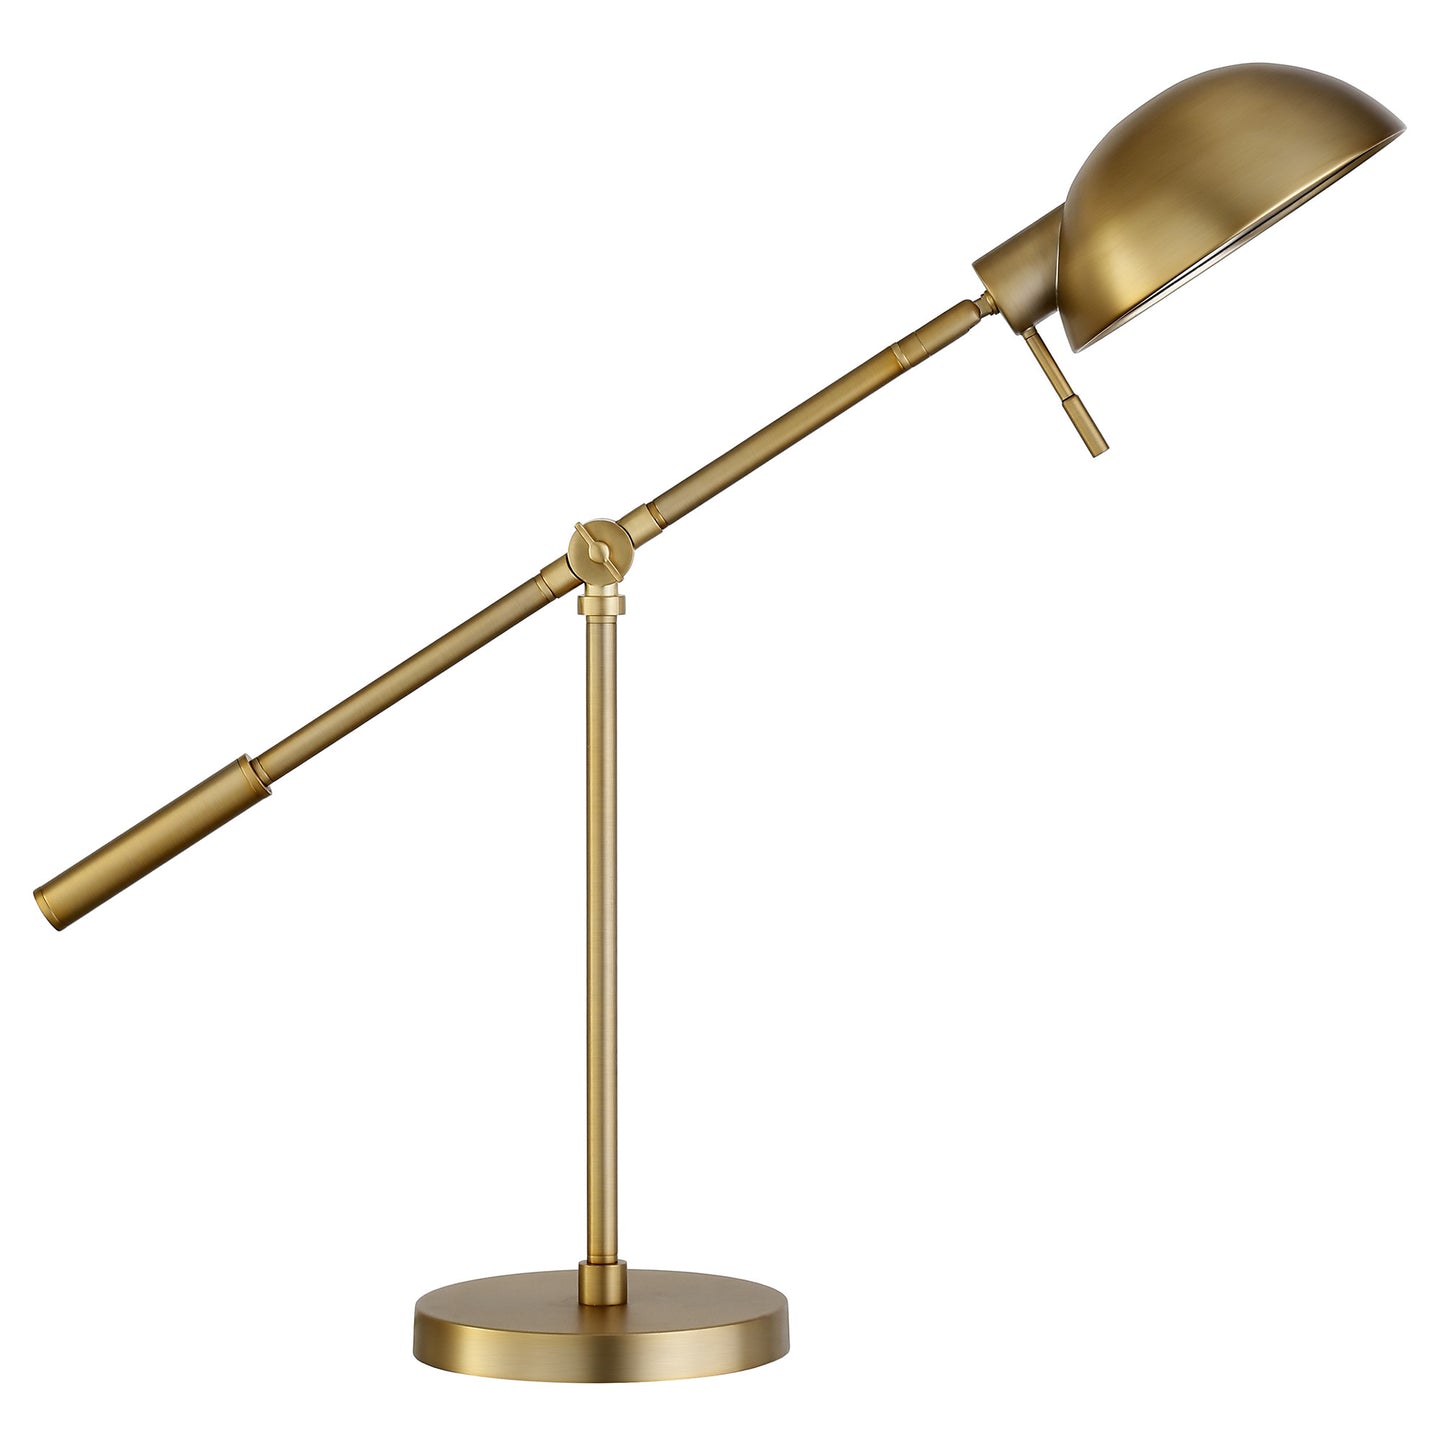 23" Brass Metal Desk Table Lamp With Brass Dome Shade